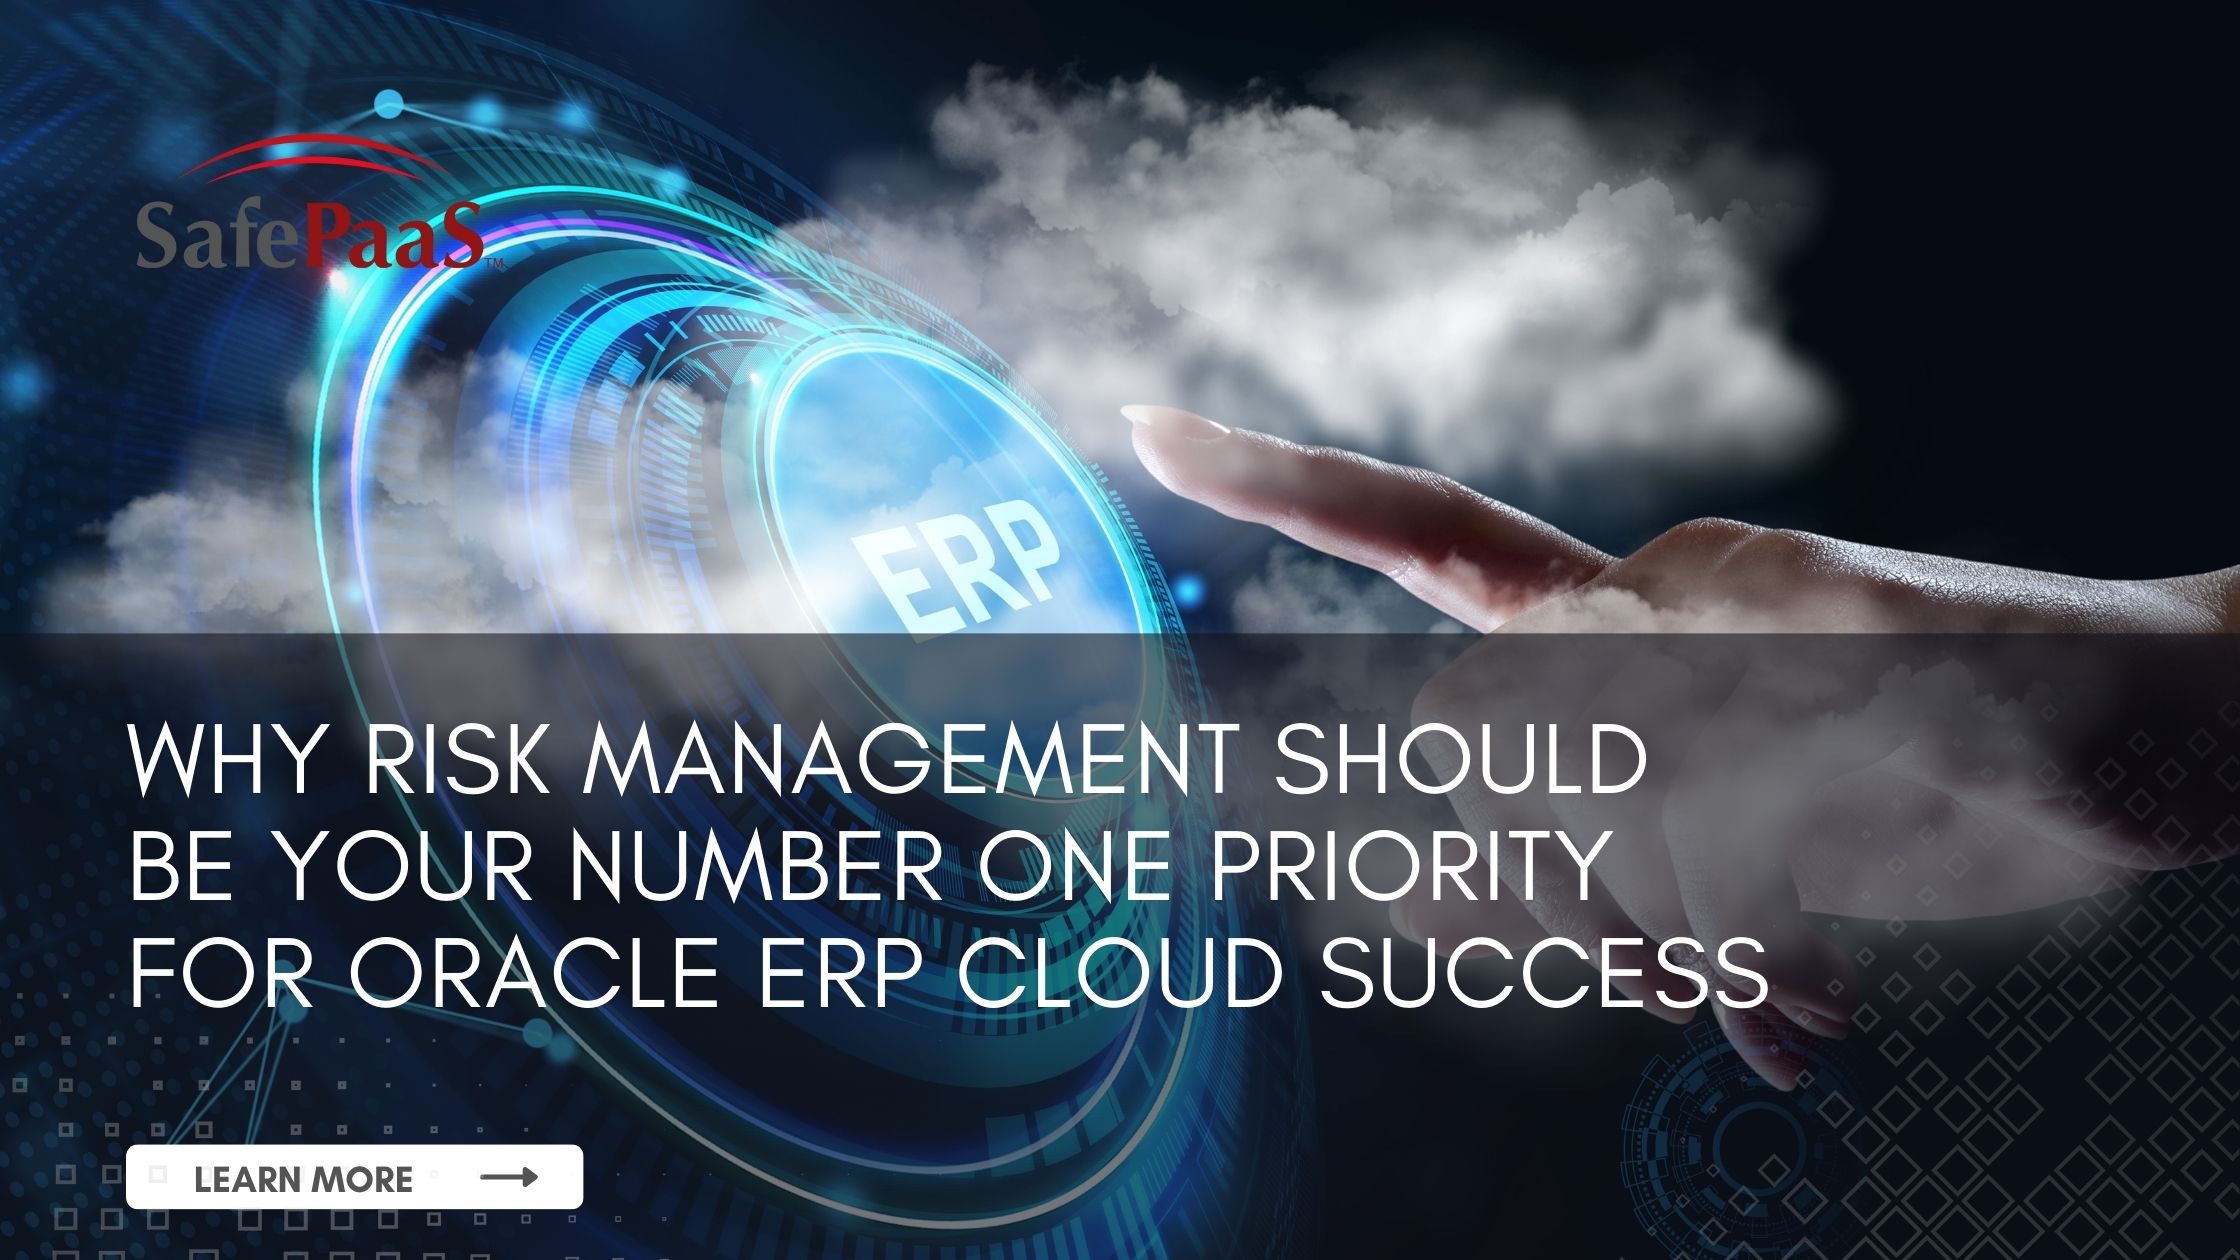 Why risk management is key for Oracle ERP Cloud Success  - SafePaaS